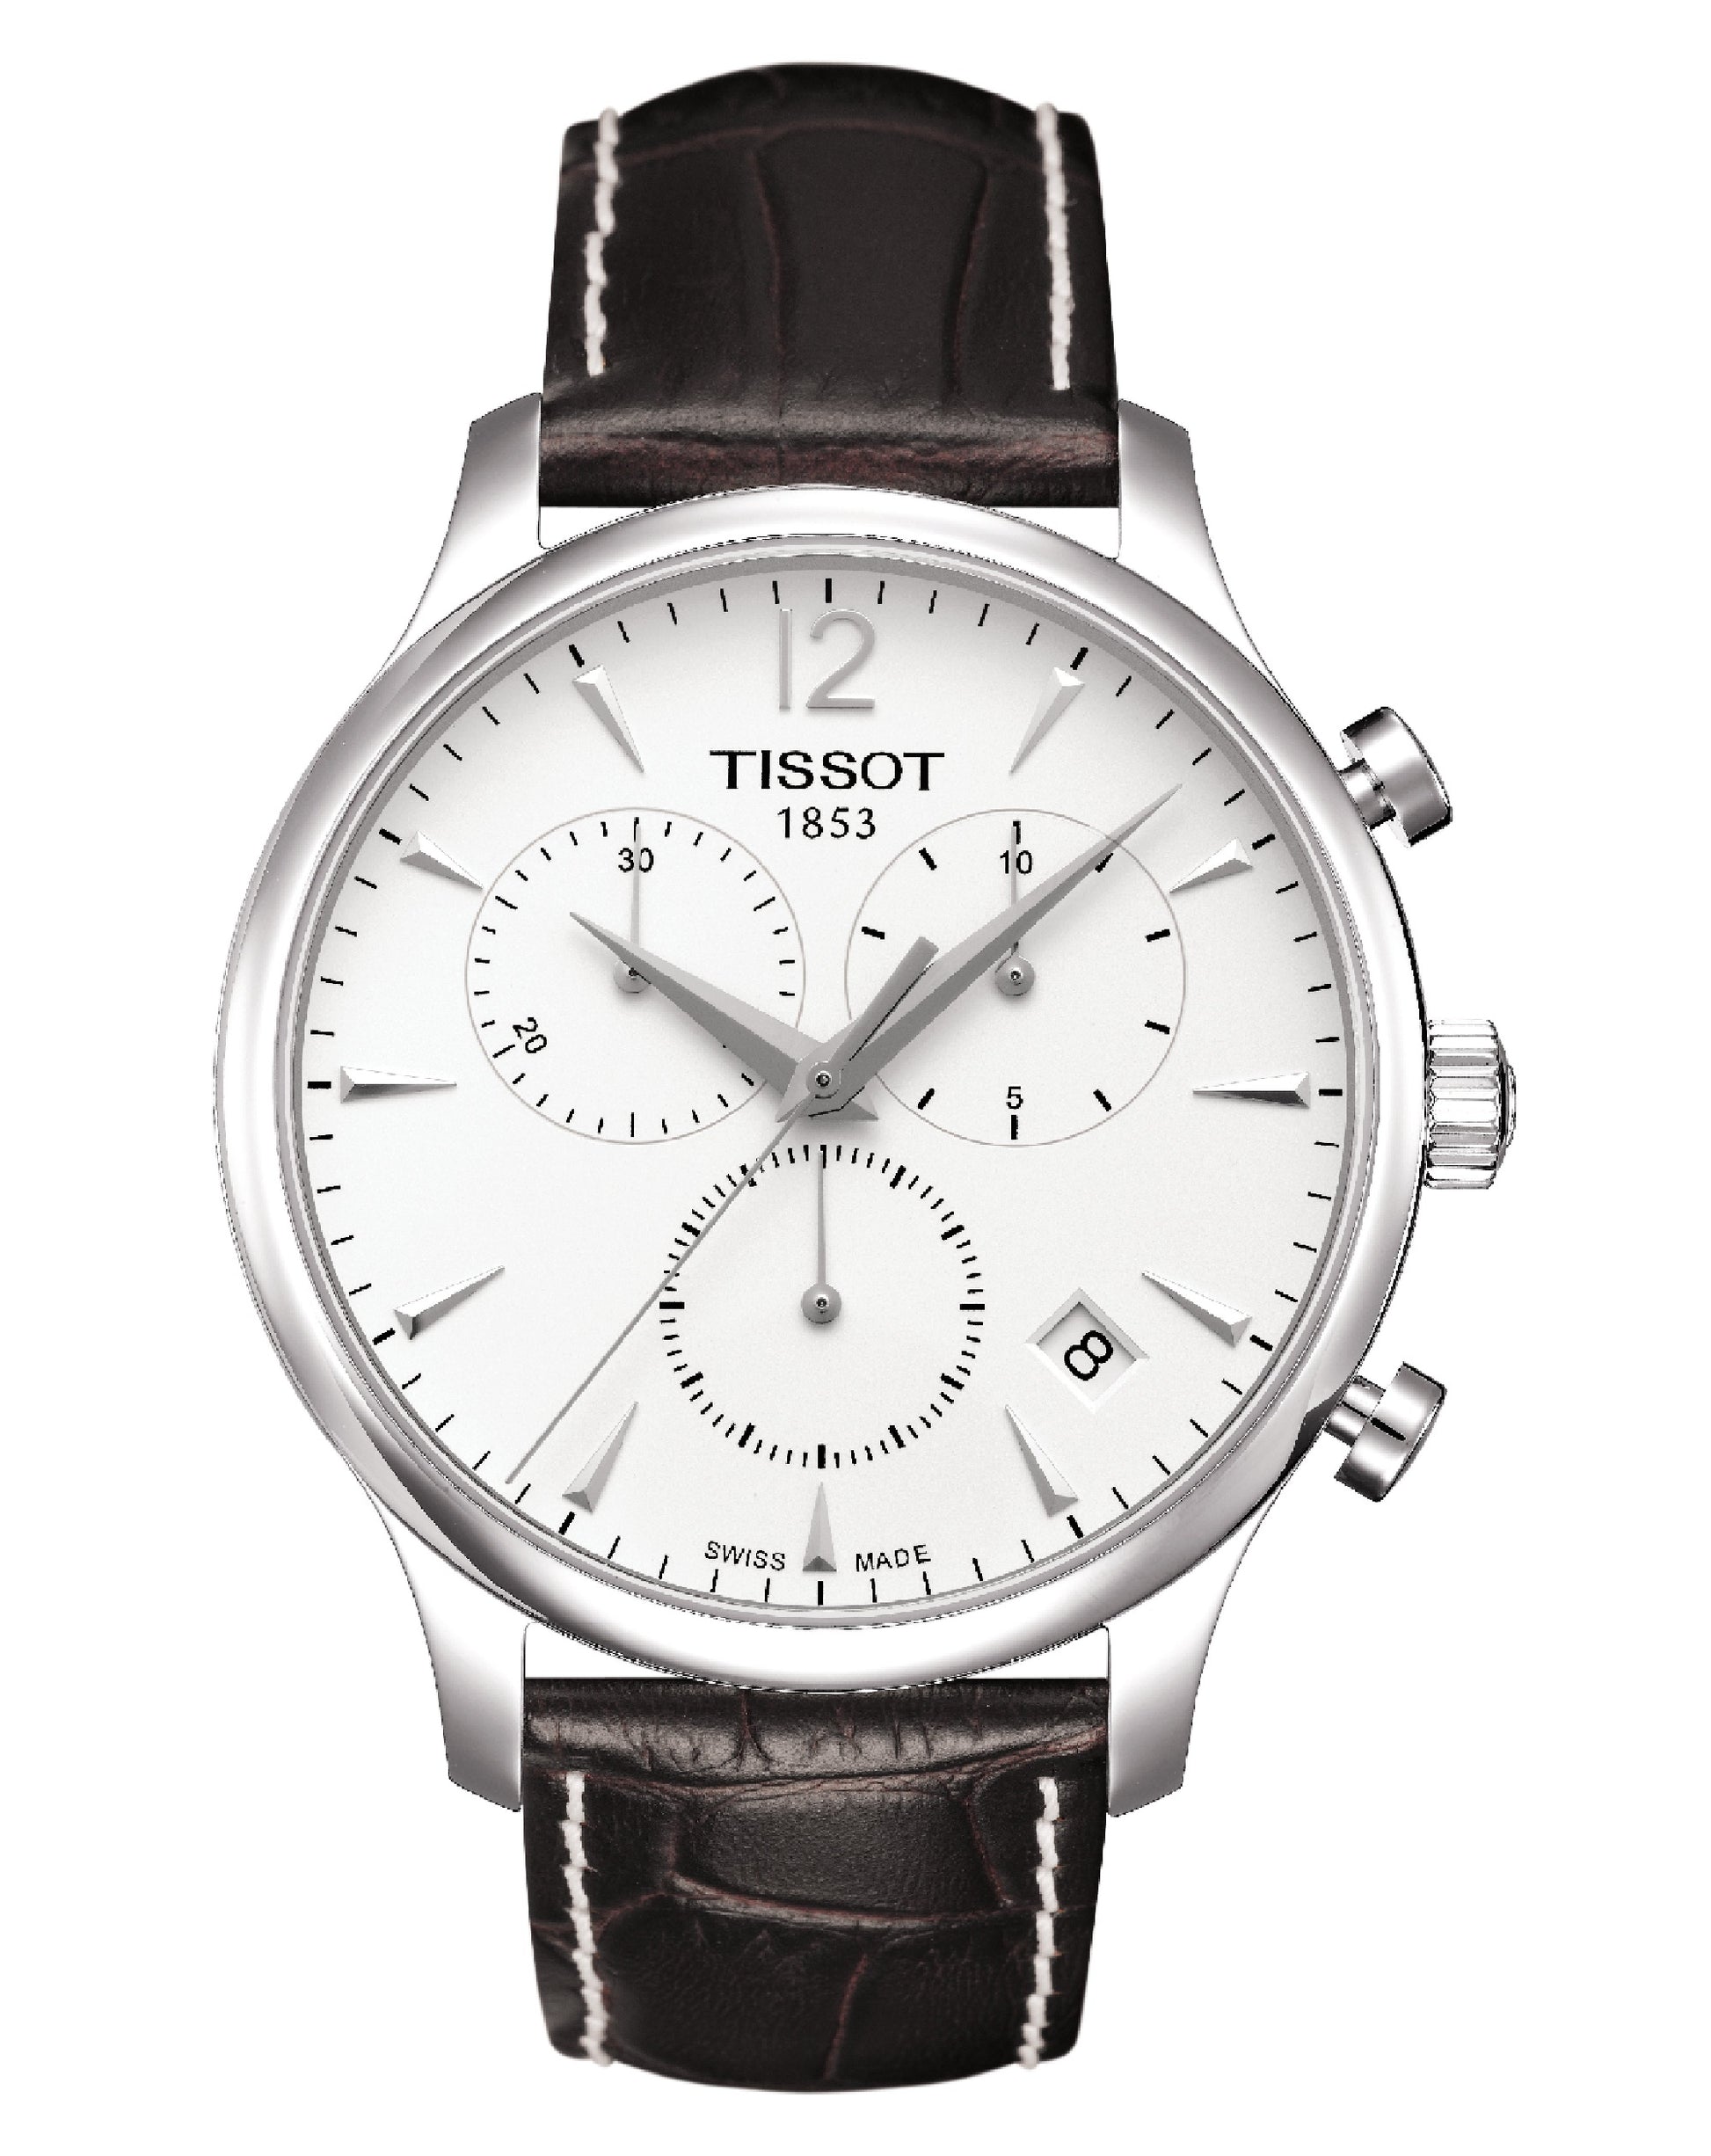 Tissot T063.617.16.037.00 Tissot Tradition SILVER Dial BROWN Leather Strap Watch